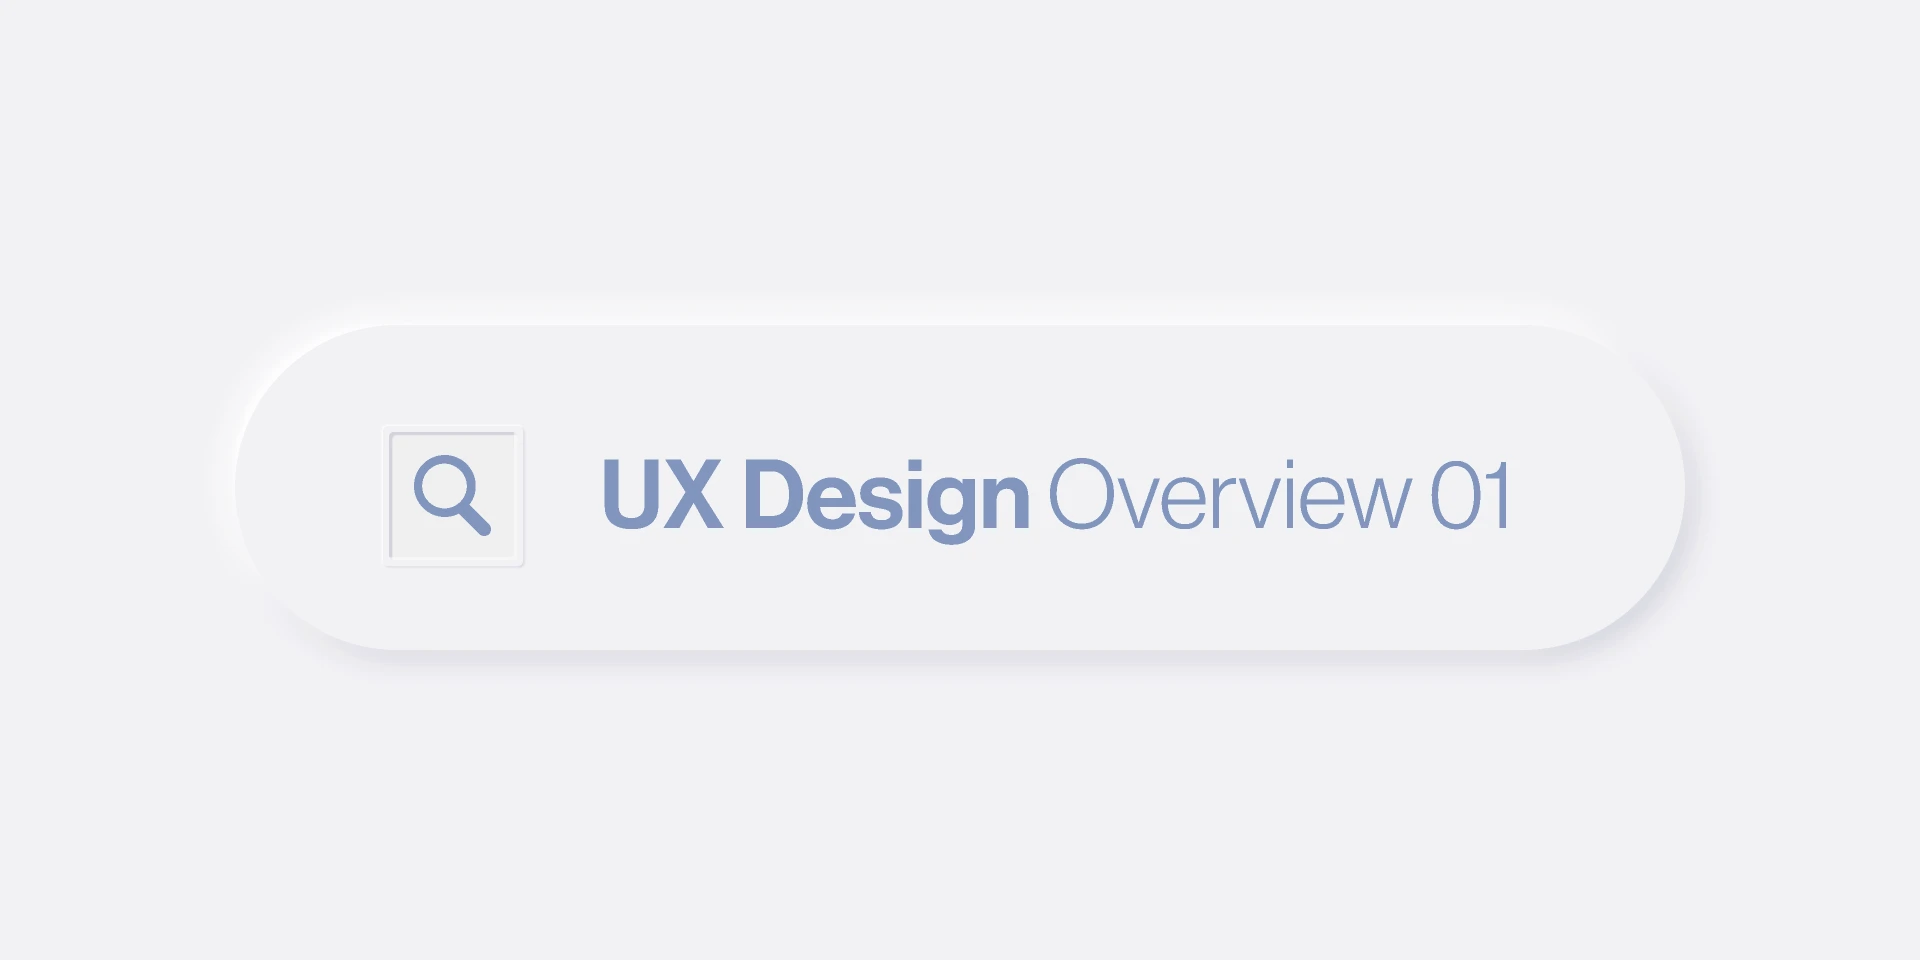 User experience overview 01 for Figma and Adobe XD